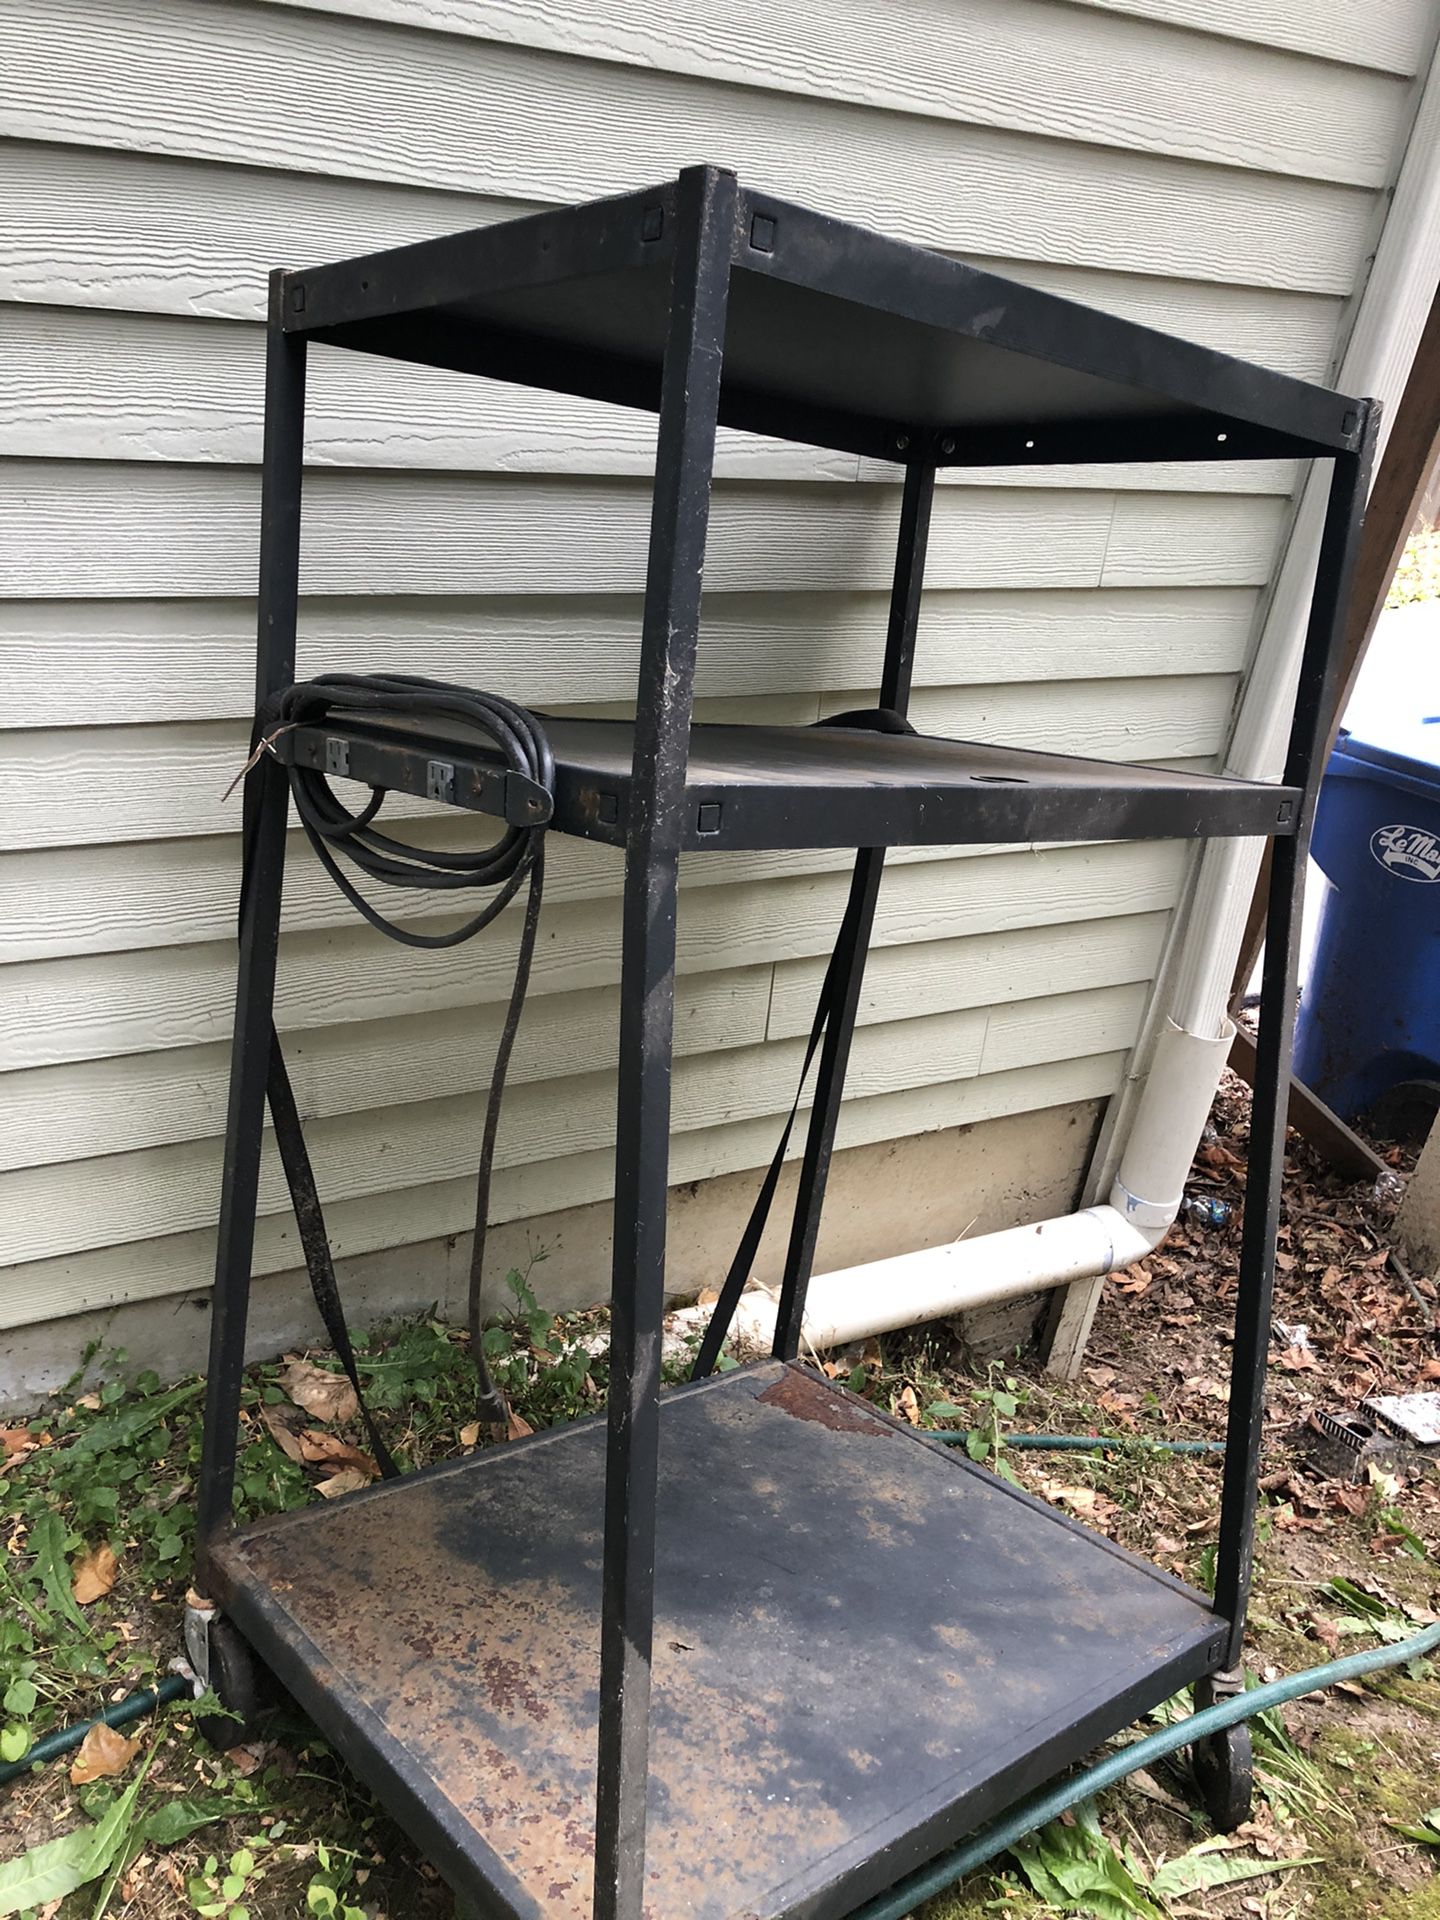 FREE - TV cart, could be used for welding or scrap.